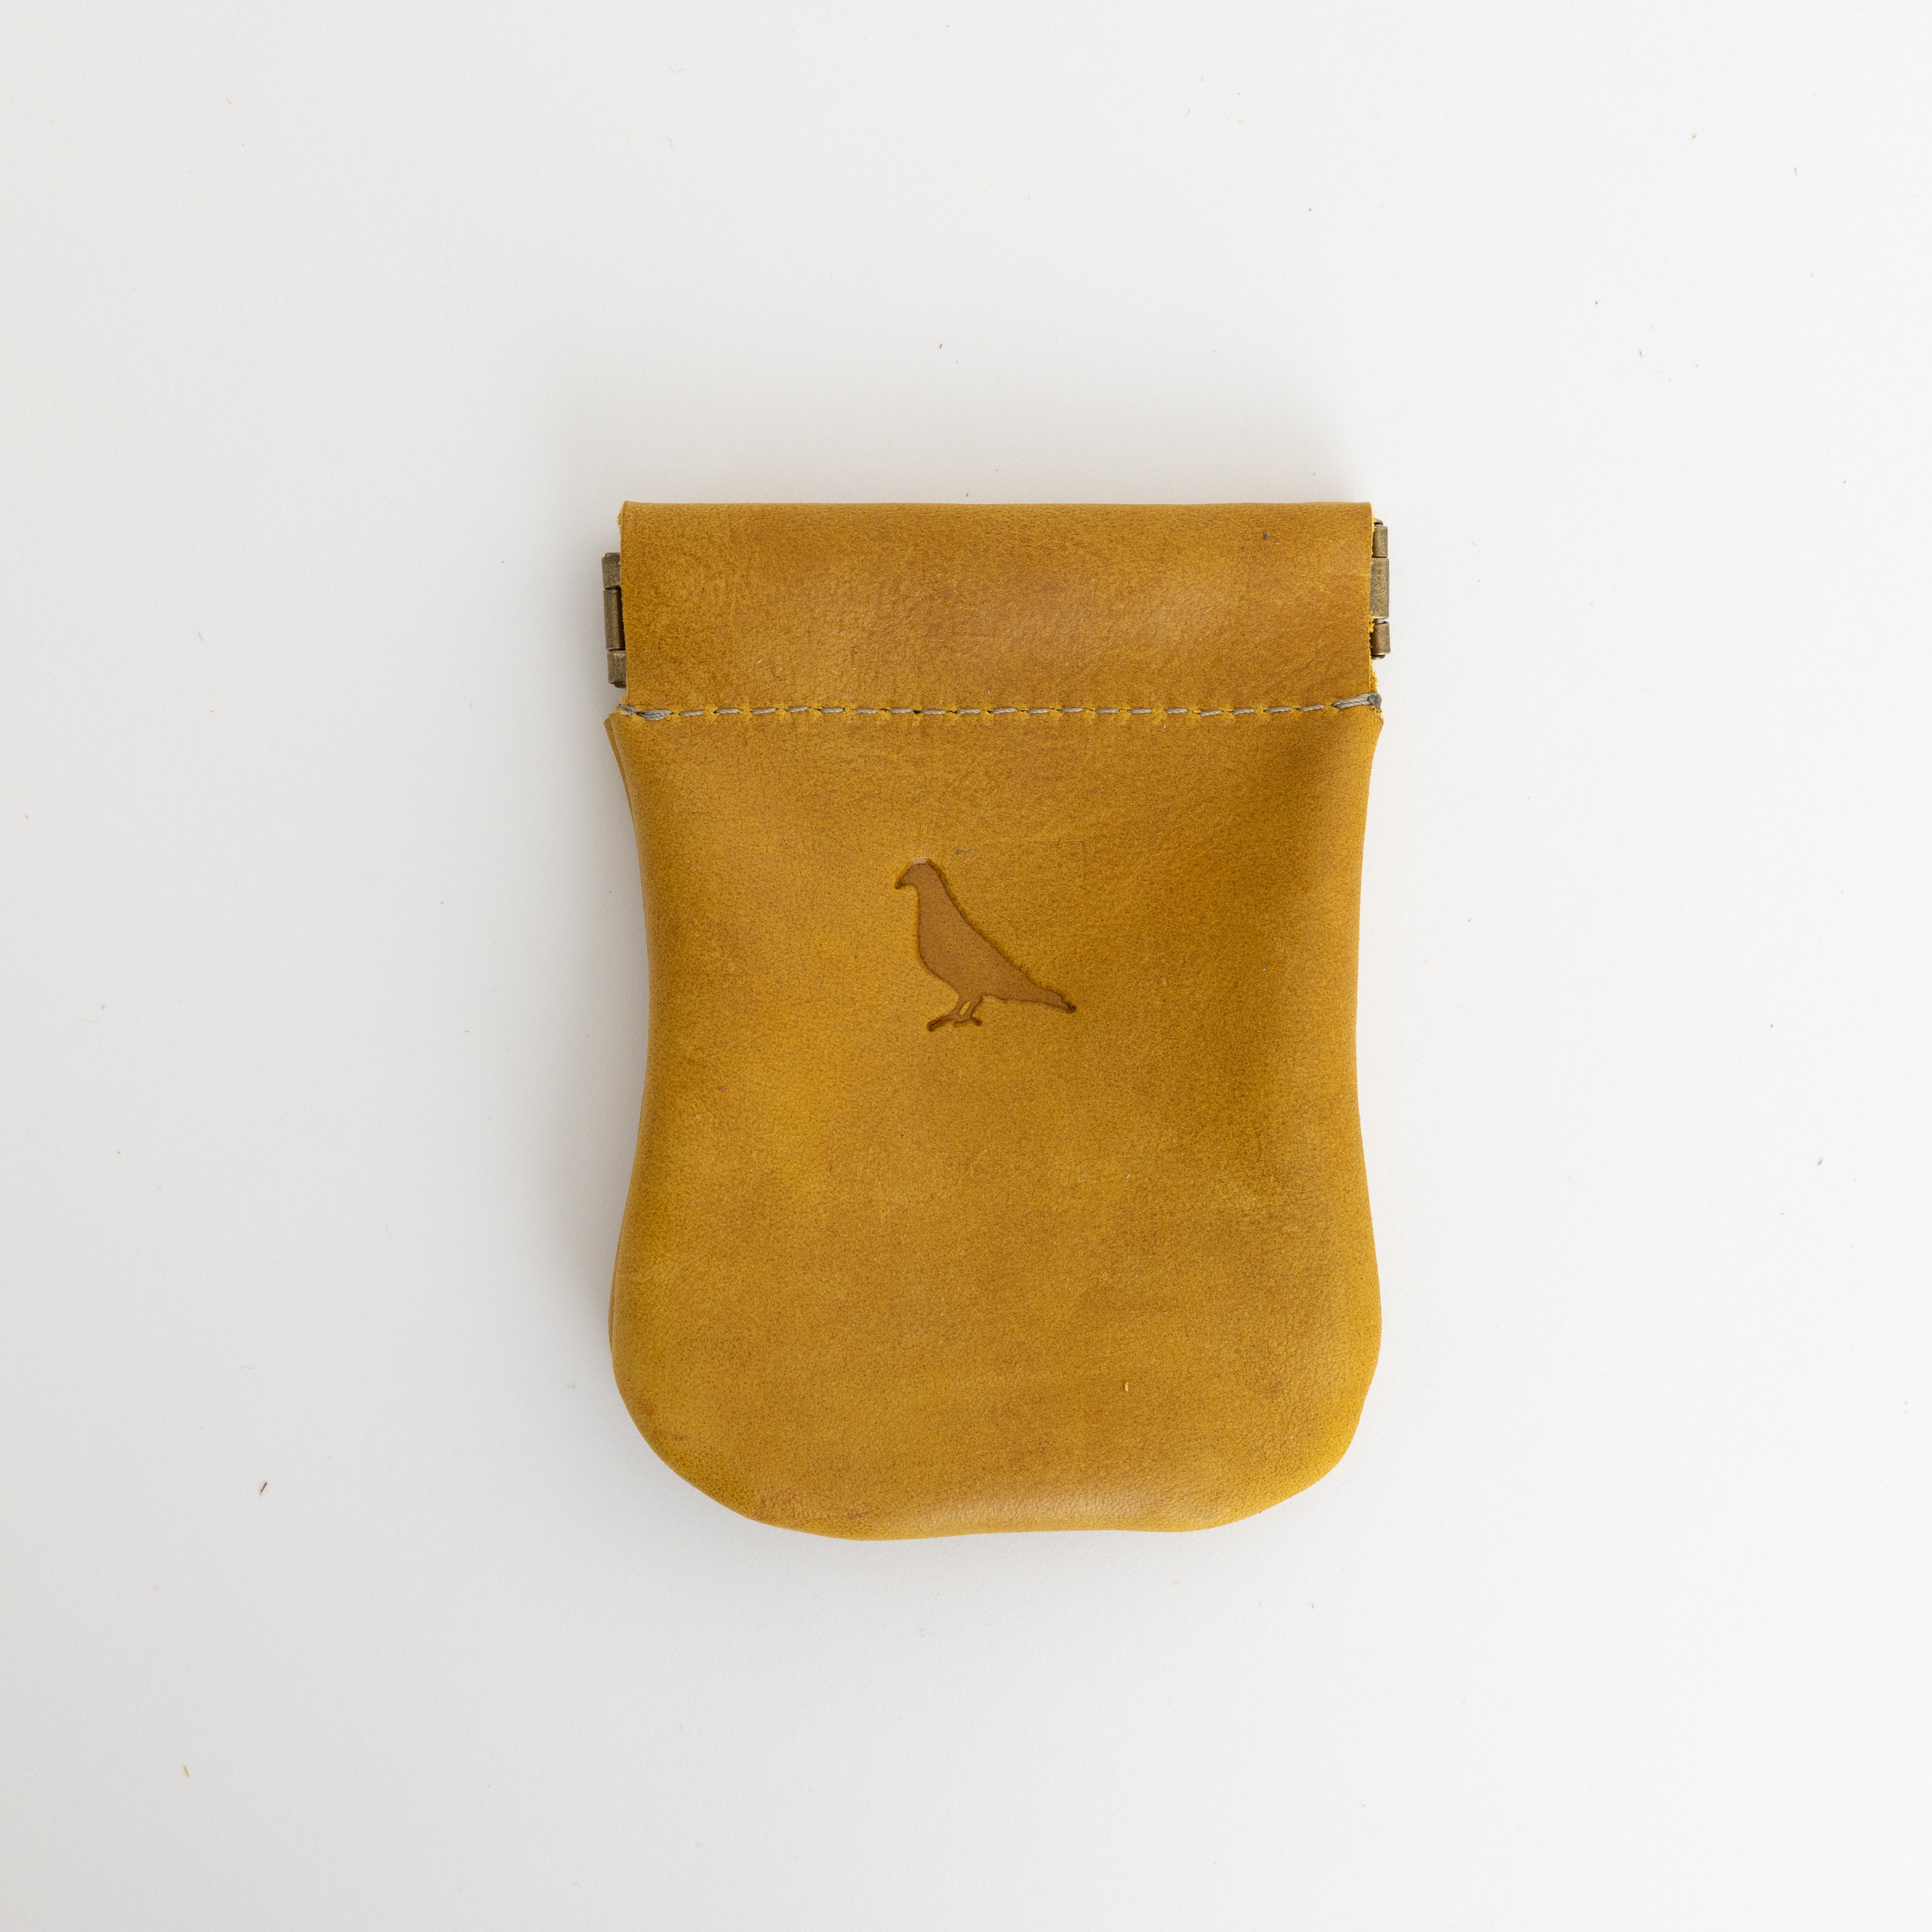 The PiLu pouch